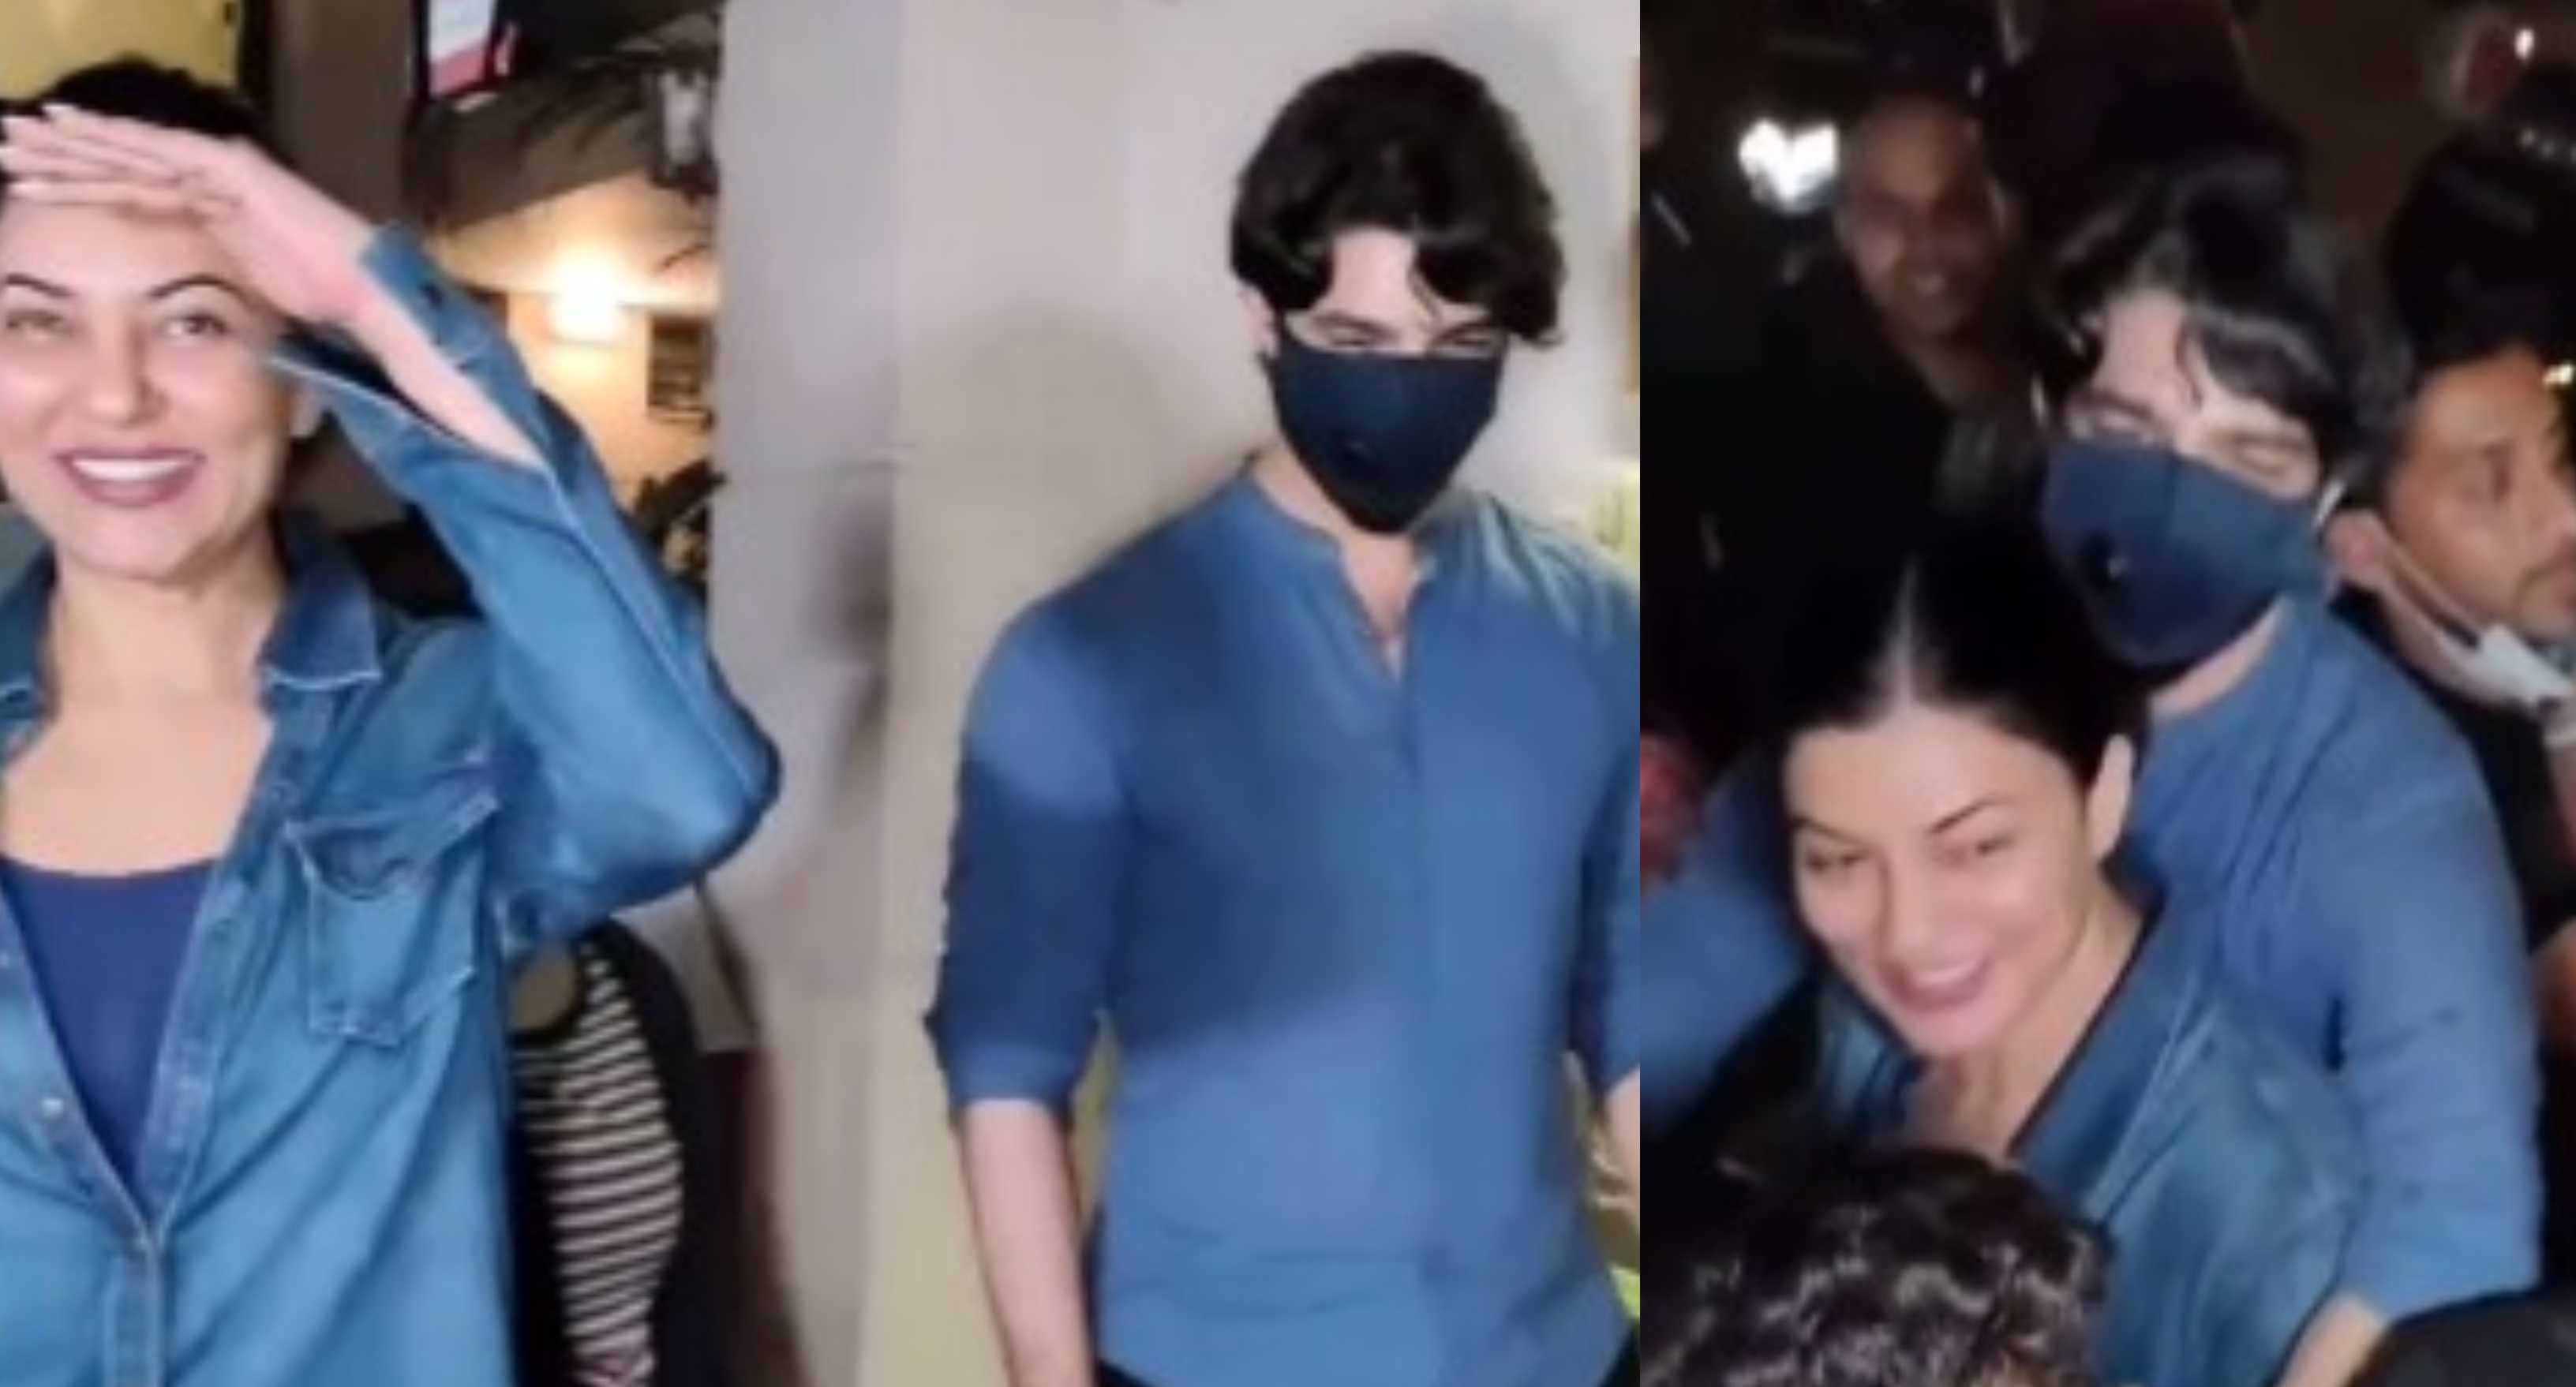 Sushmita Sen’s ex Rohman Shawl protects her while walking through a crowd; fans wonder if they are back together